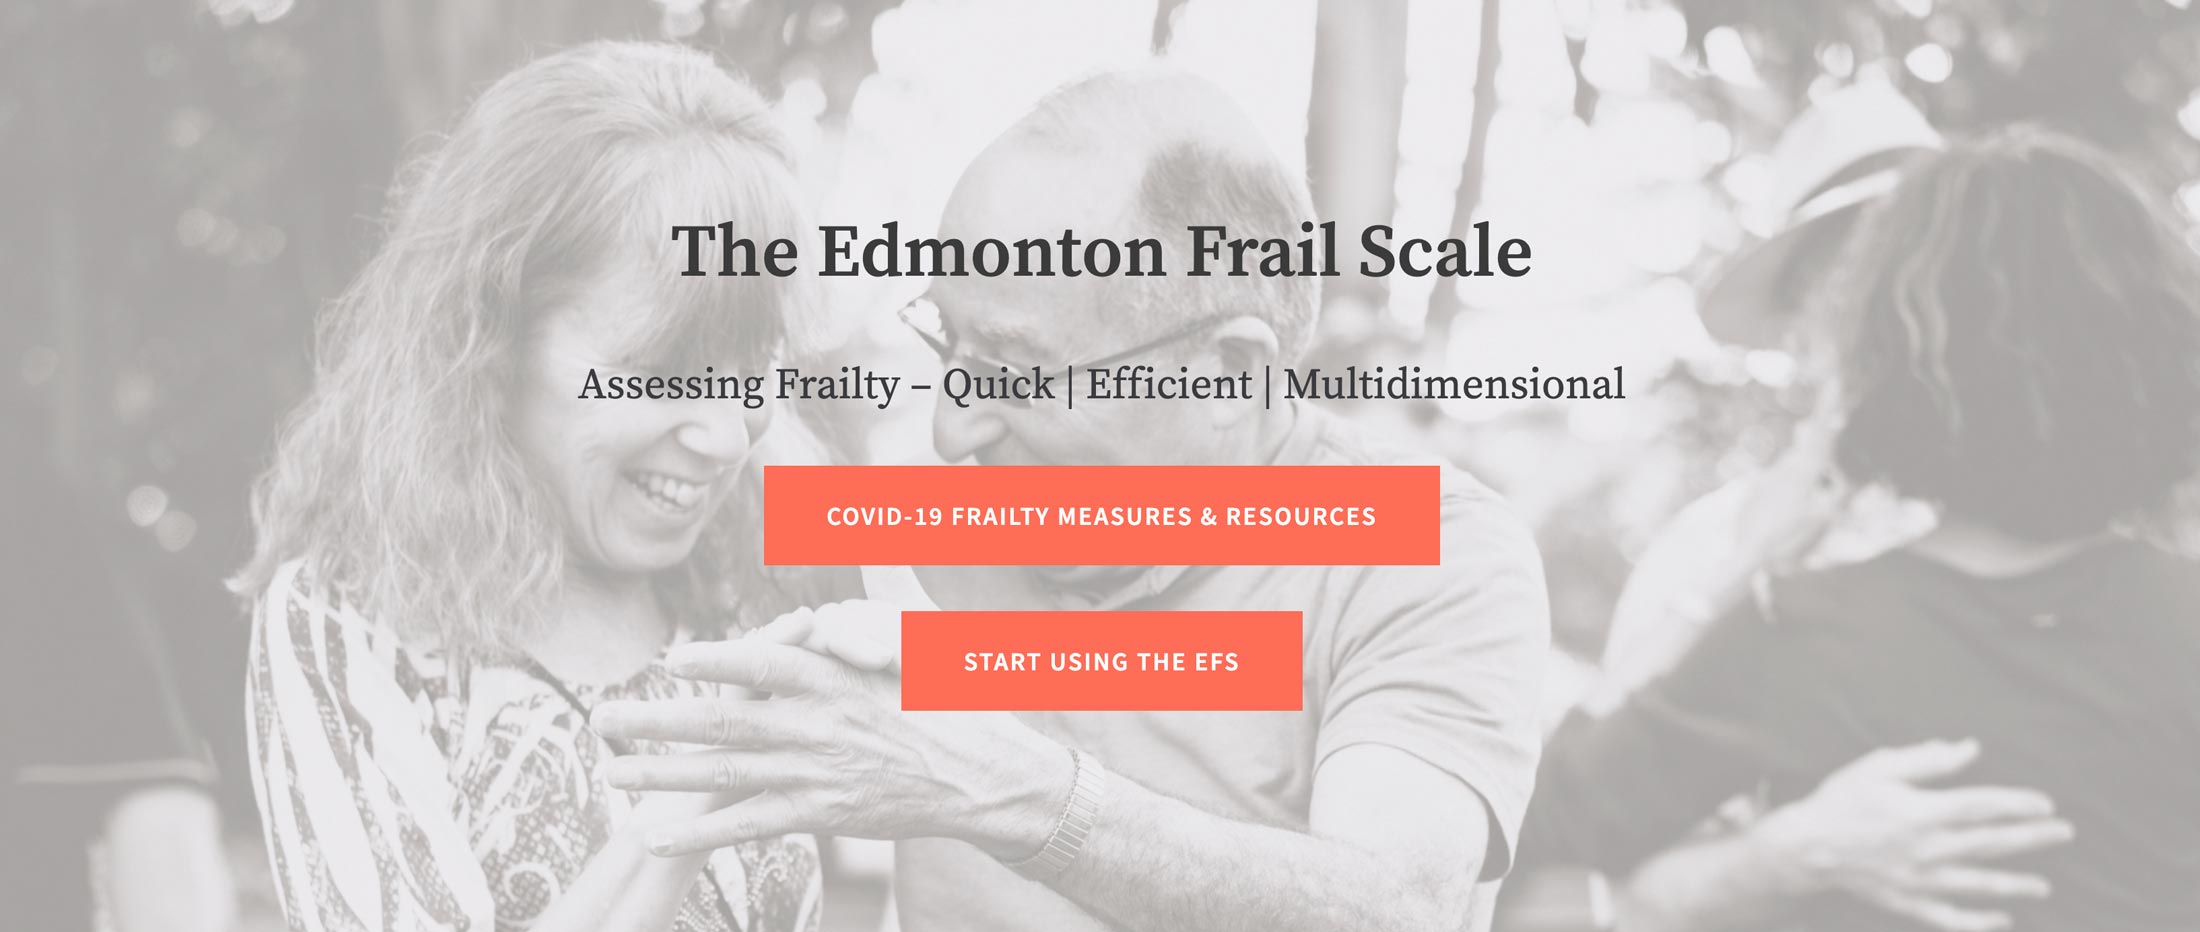 Screenshot from the website showing two older couples dancing, with the title The Edmonton Frail Scale; the subtitle Assessing Frailty, quick, efficient, multidimensional; and the buttons reading COVID-19 frailty measures and resources, and Start using the EFS